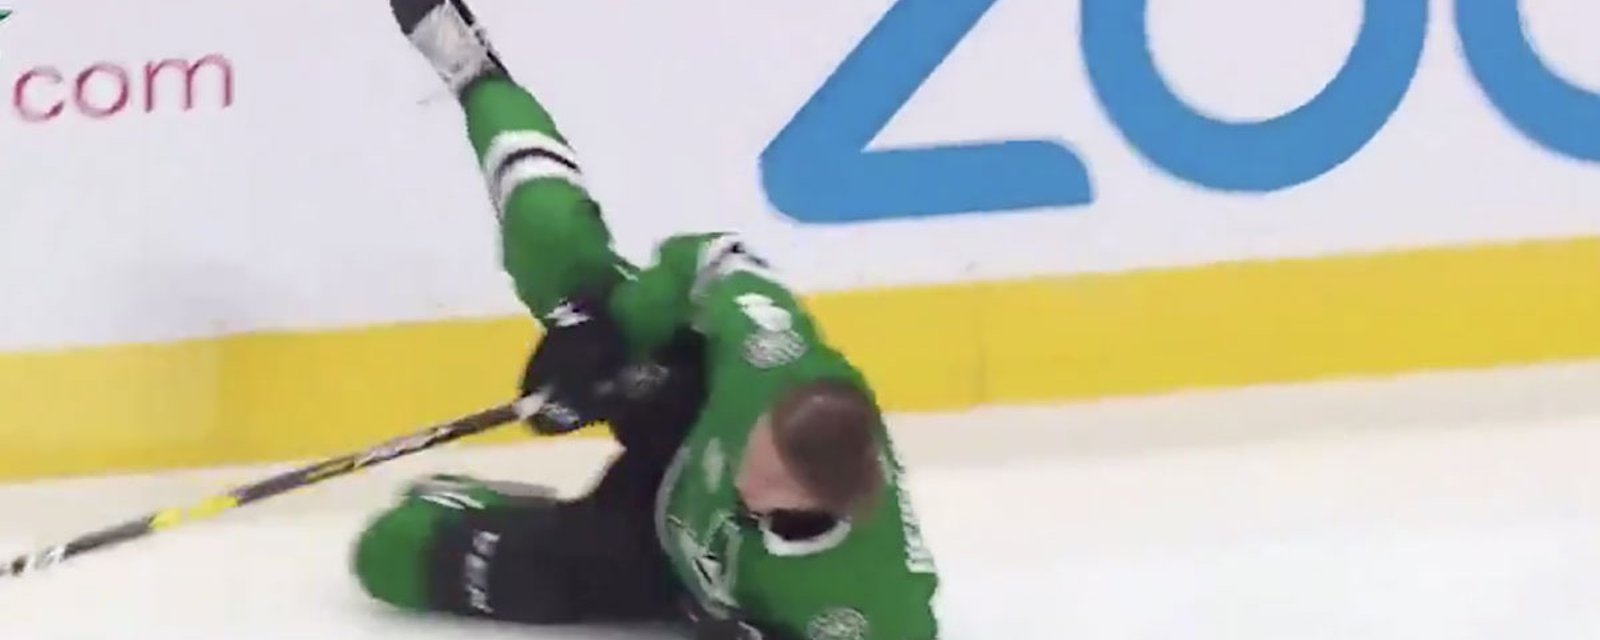 Stars’ Heiskanen takes a nasty spill during Faster skater competition